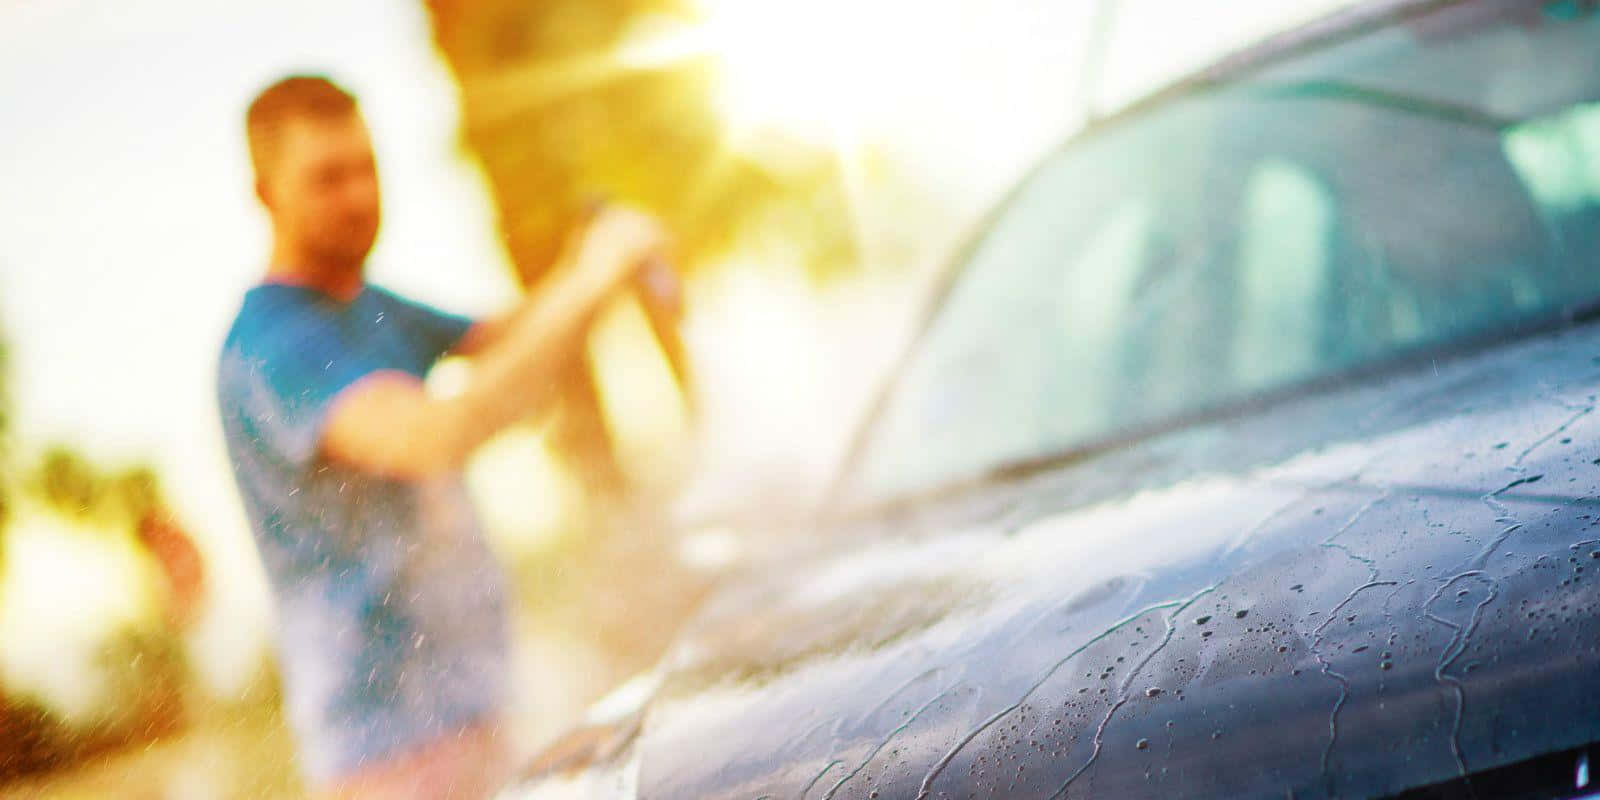 Clean up your ride with a nice car wash!